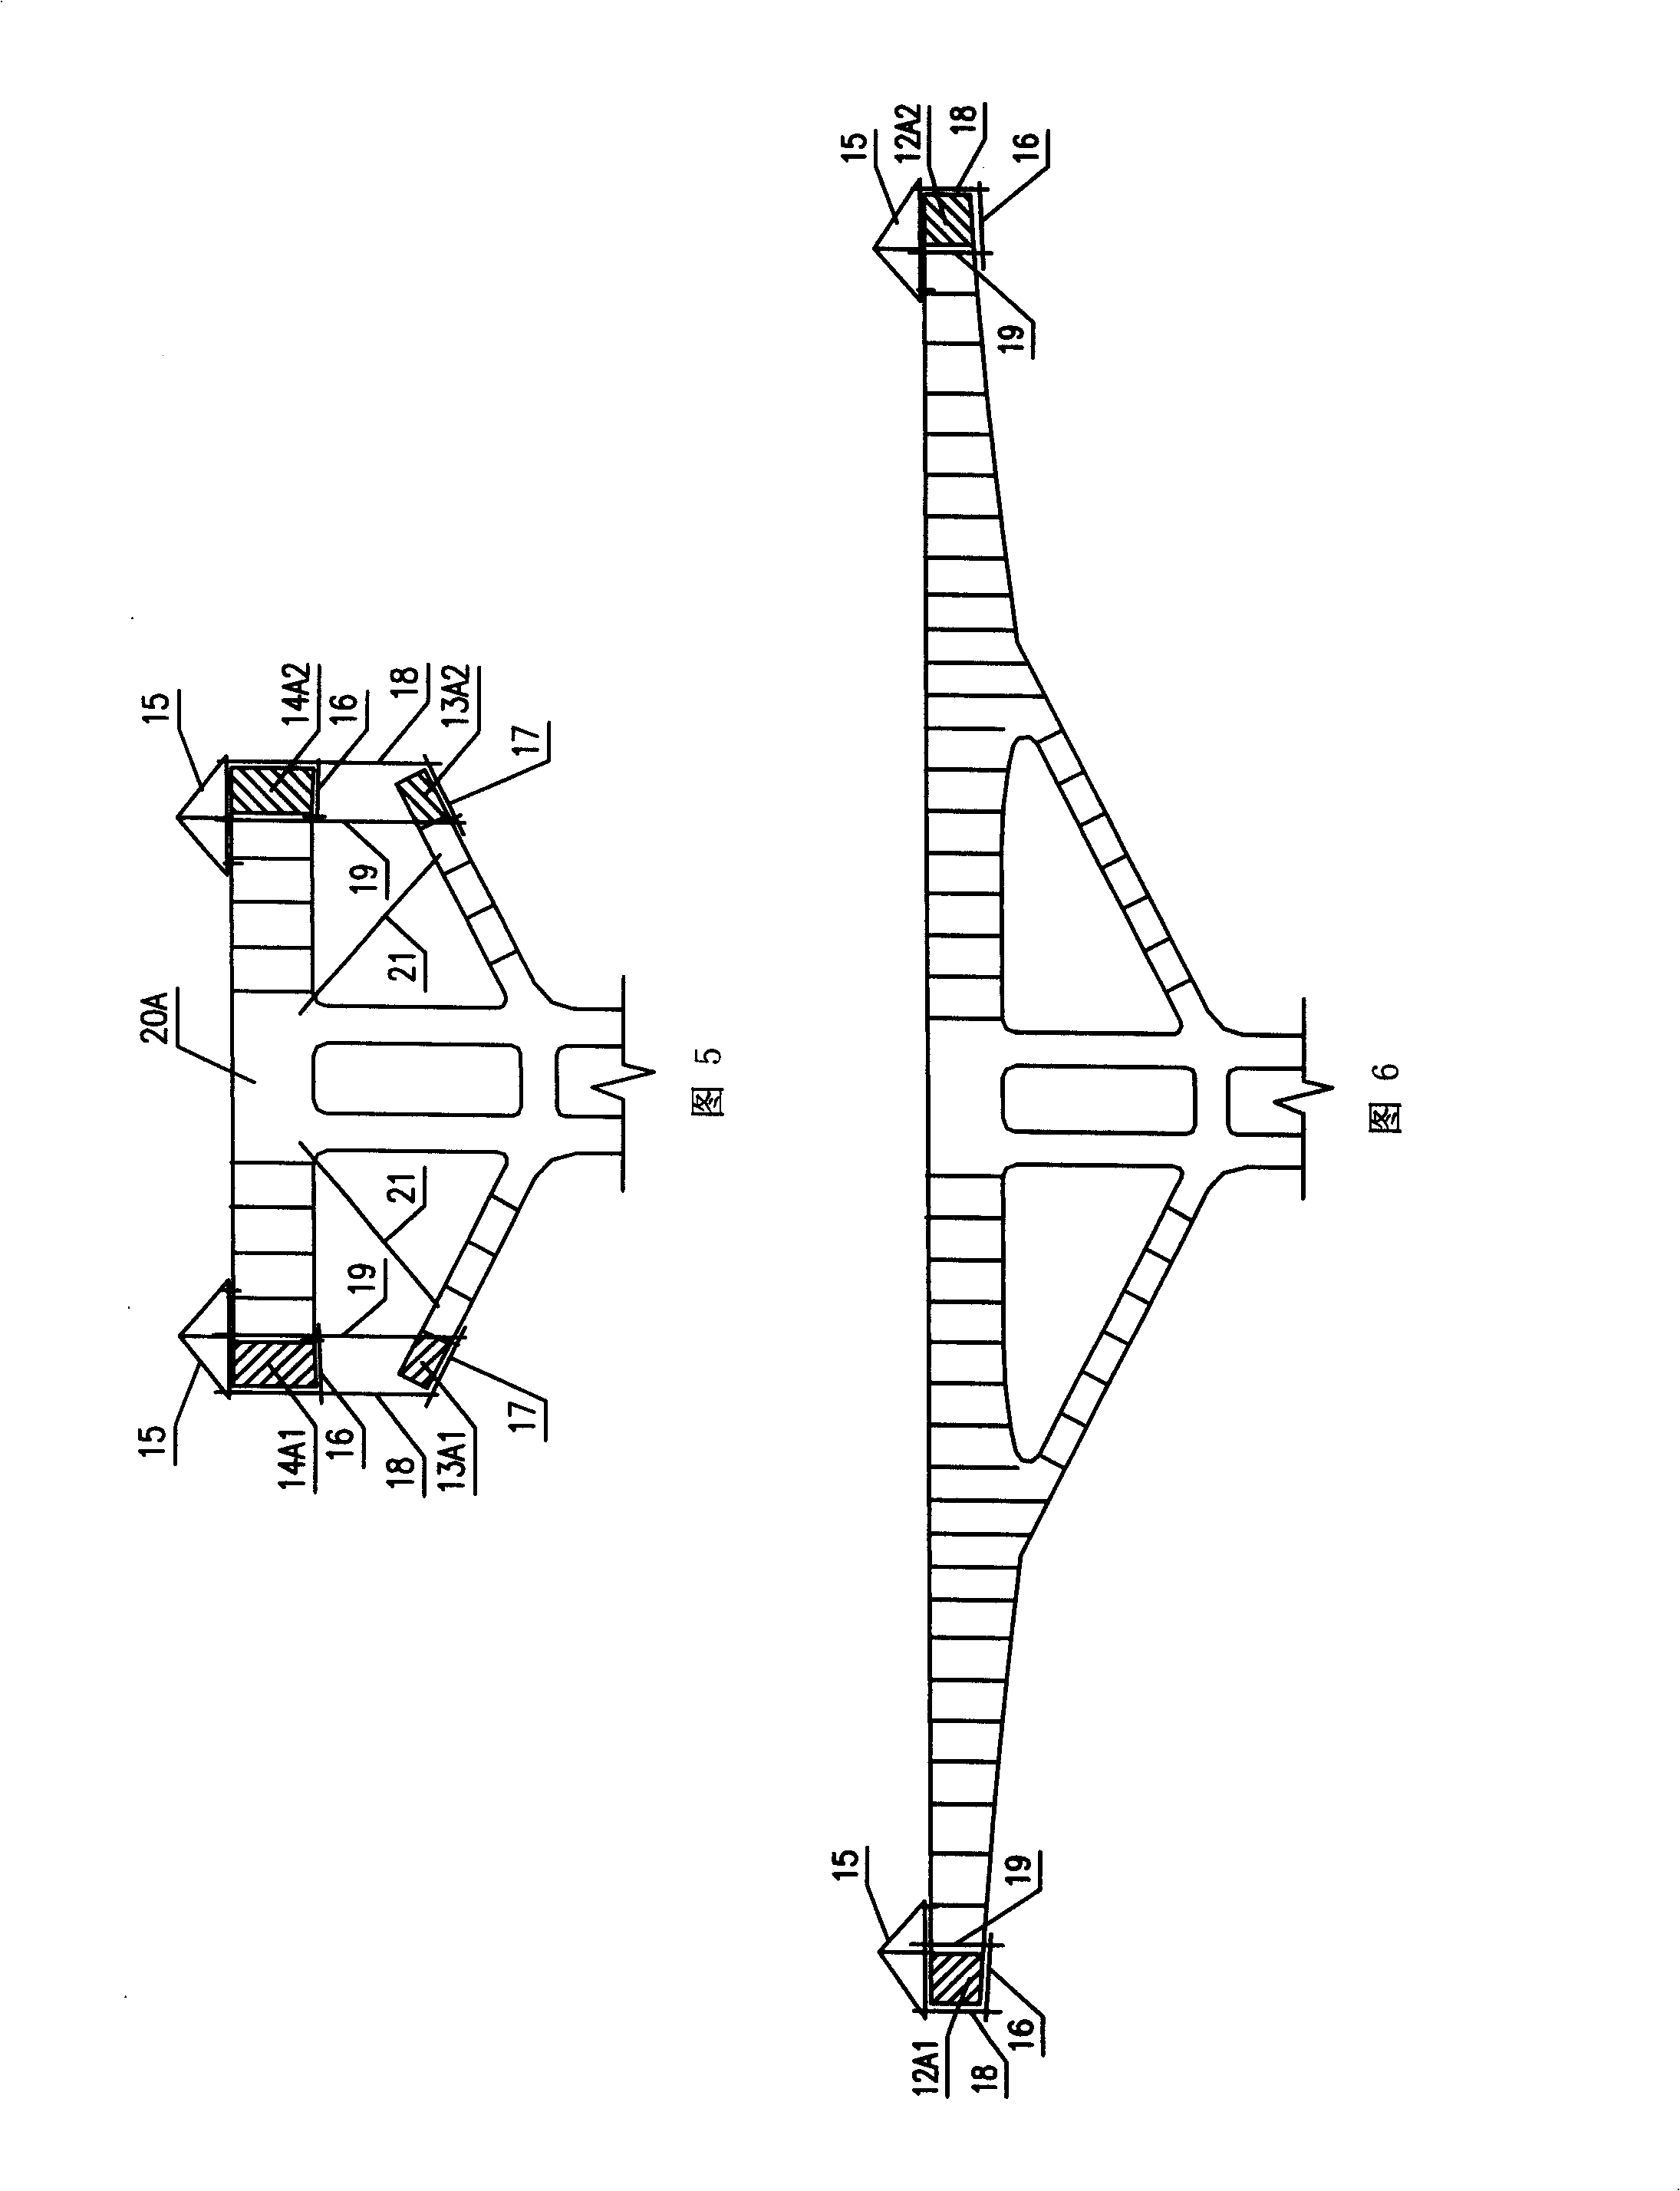 Structure of slant legged rigid frame bridge and cantalever pouring construction method